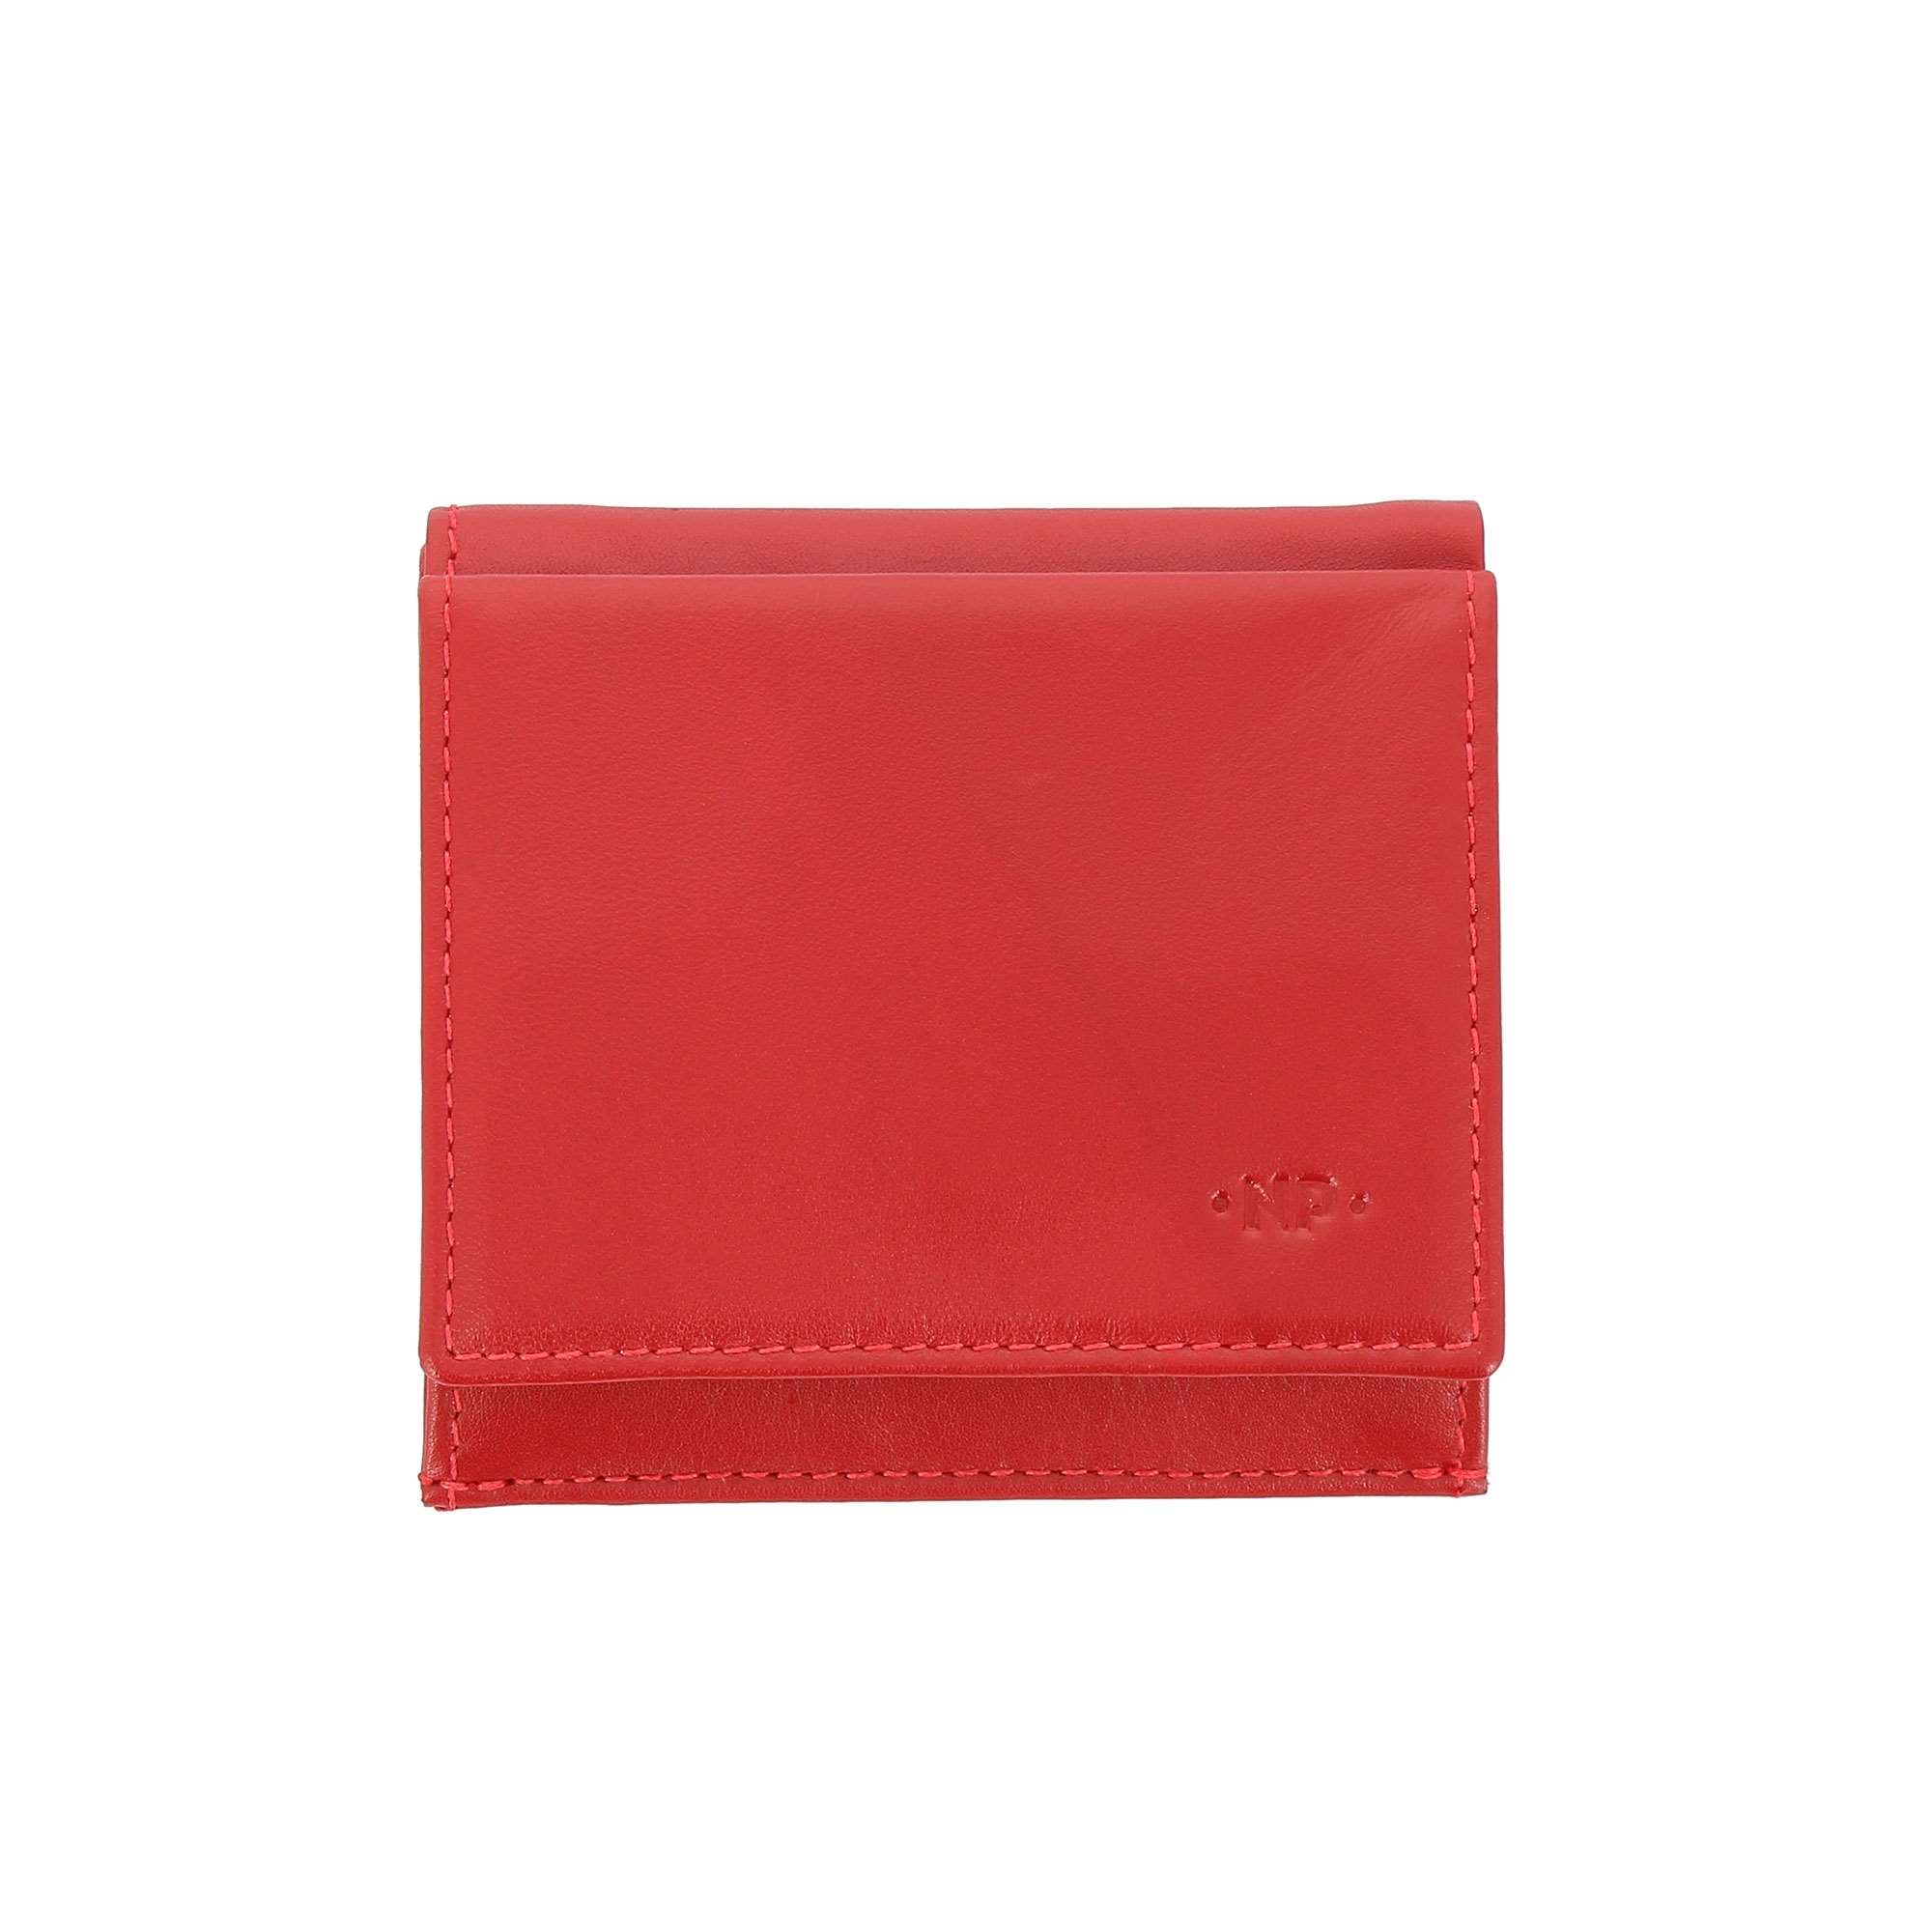 Portefeuille - Nappa - Flavio - Rouge - Homme